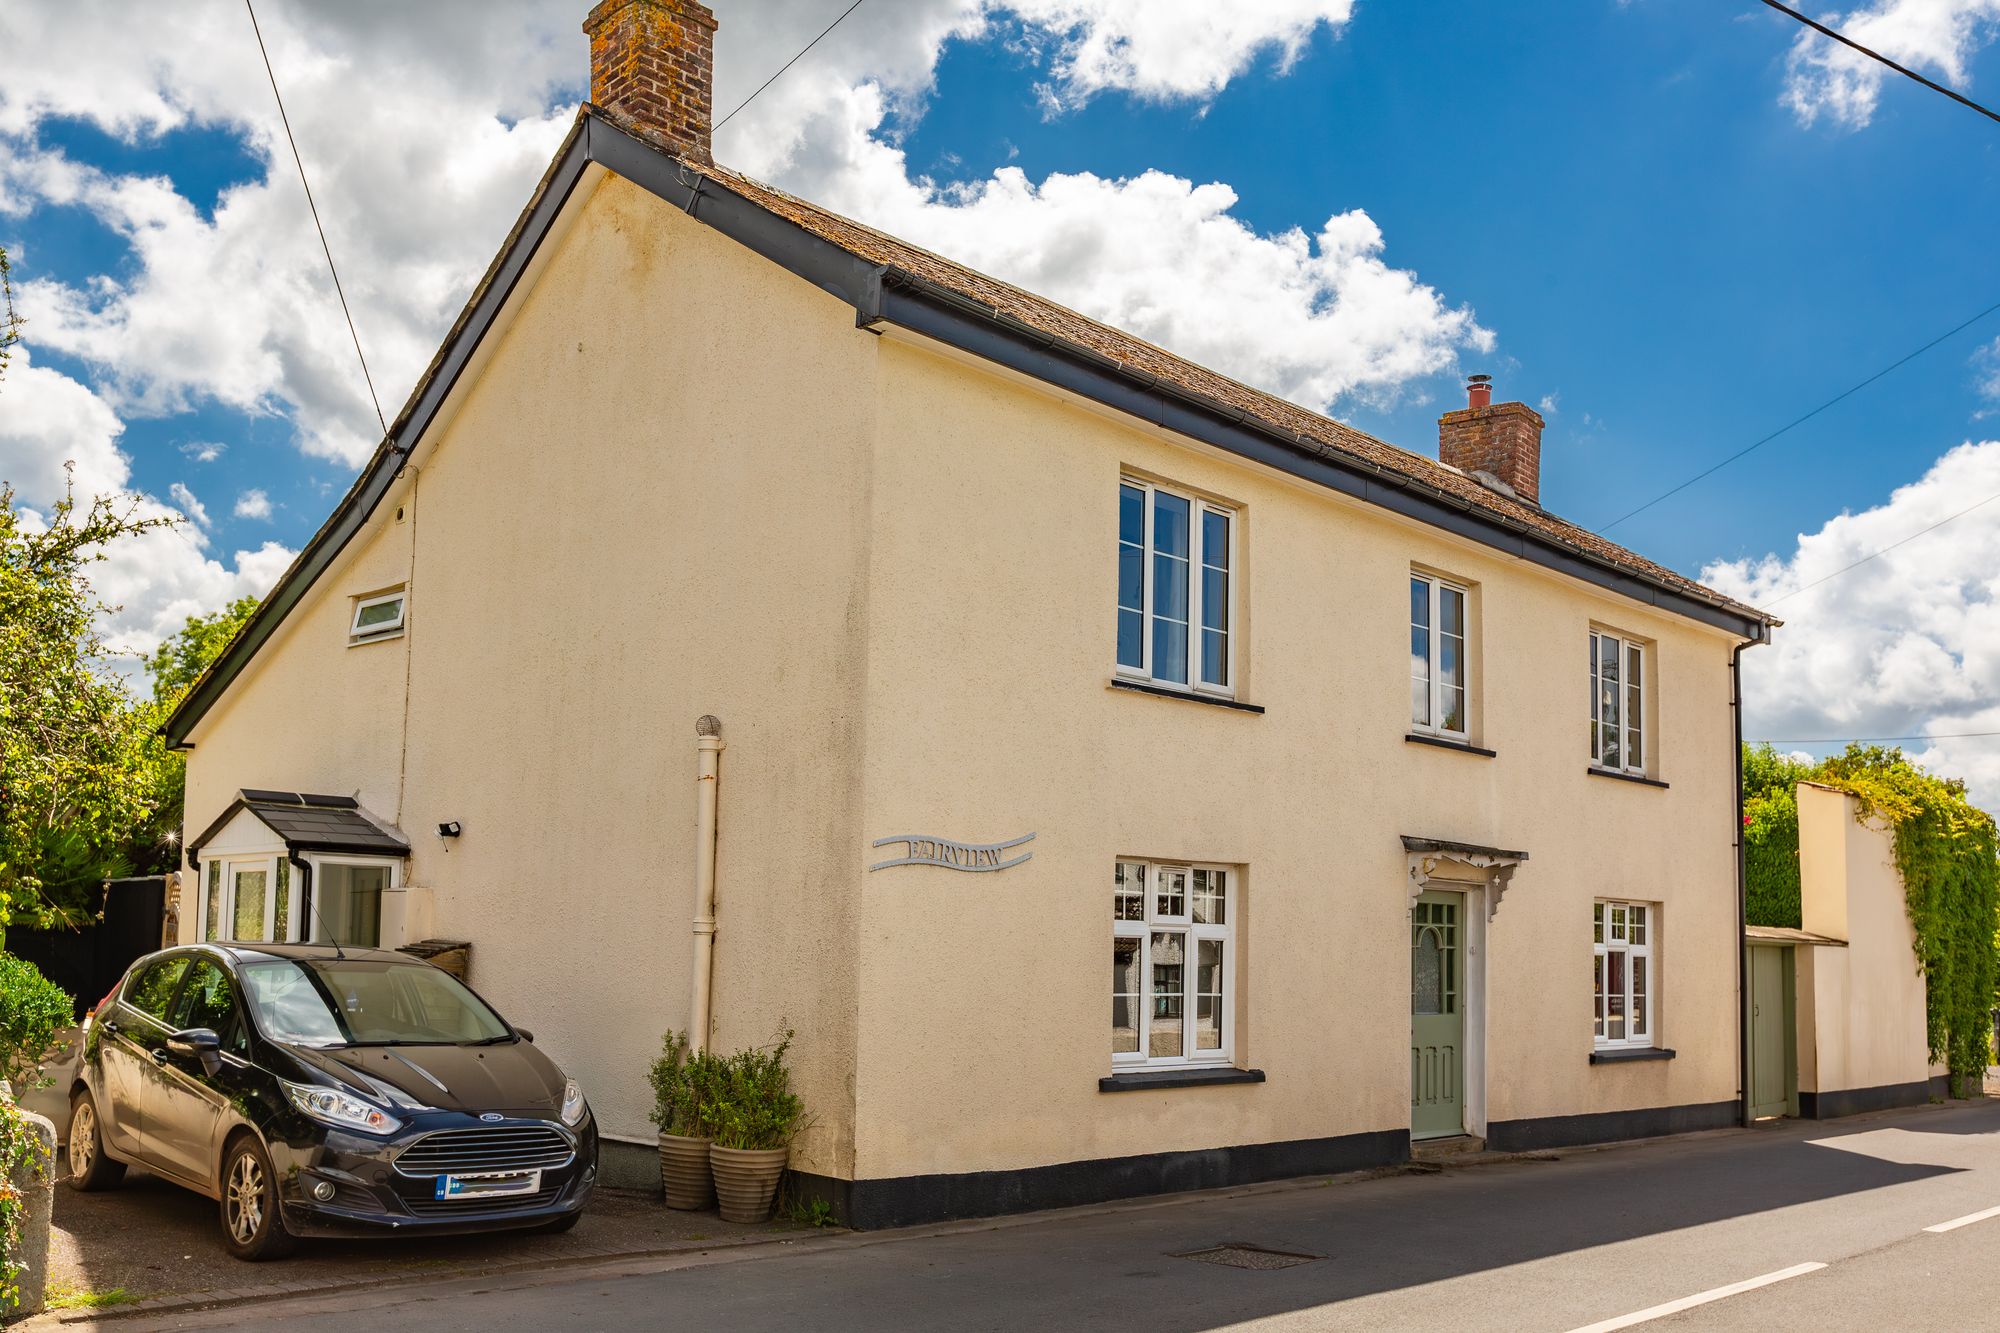 4 bed detached house for sale in Tedburn St. Mary, Exeter  - Property Image 1